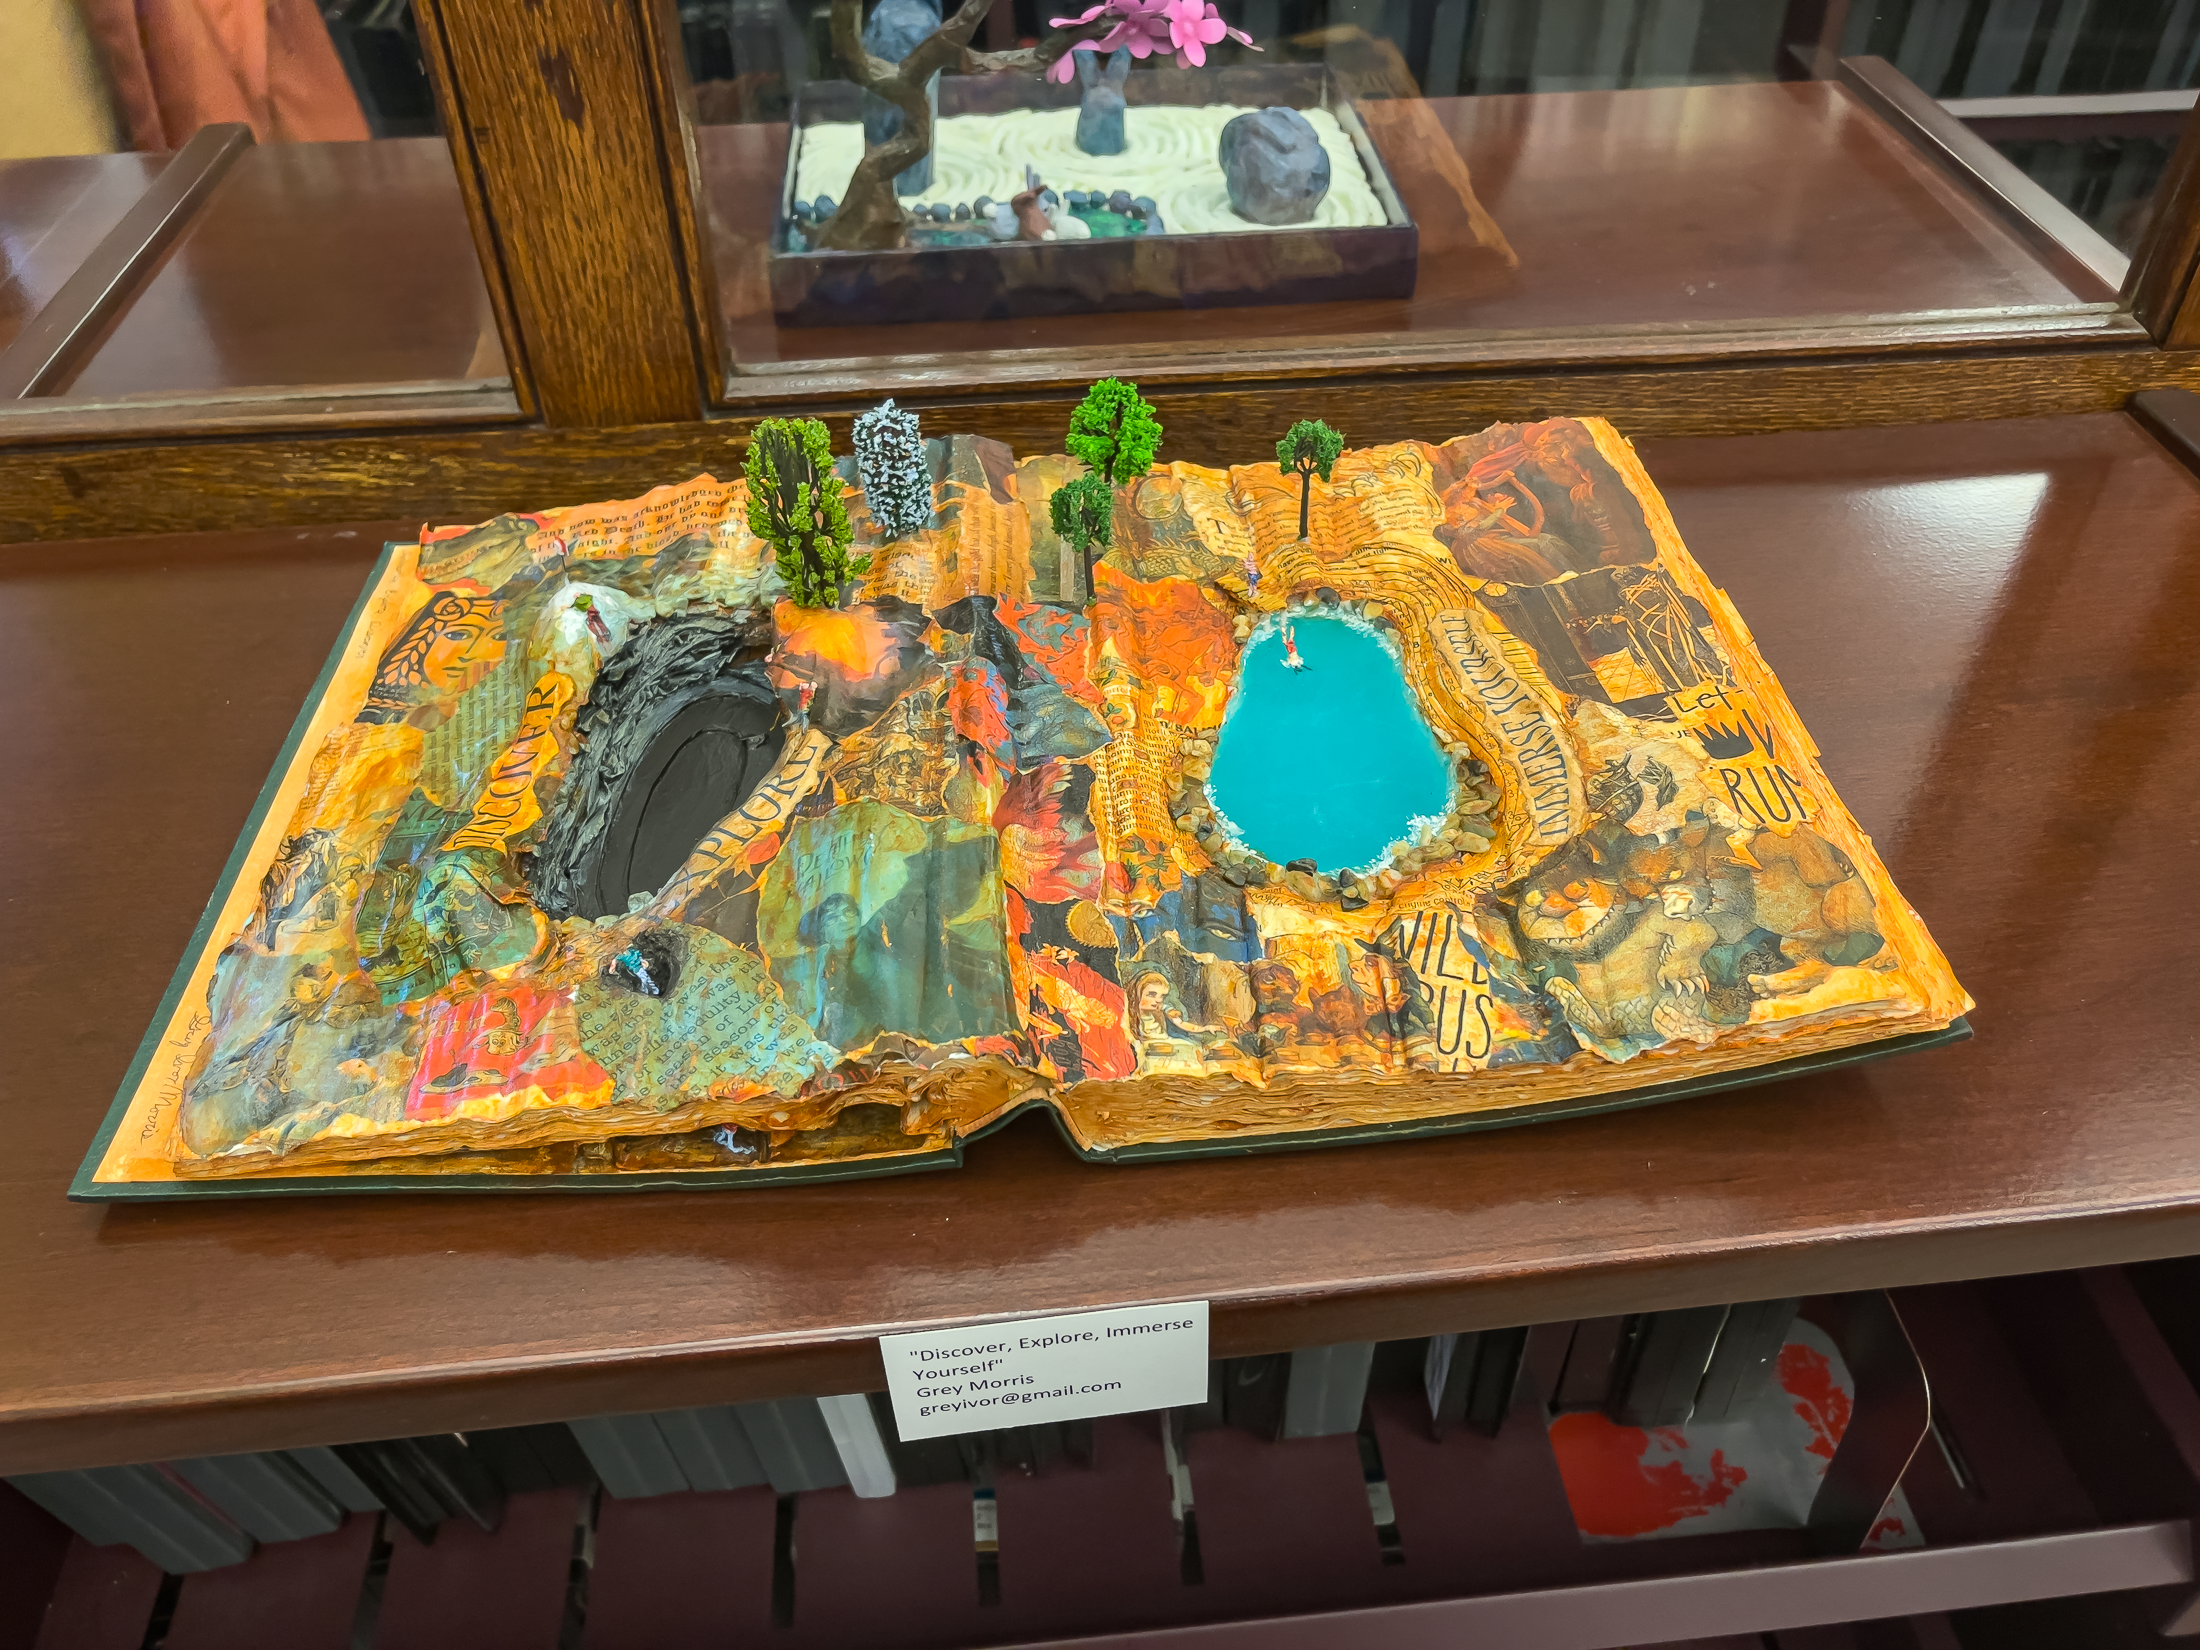 Sculpture of a landscape and two ponds made by carving out and adding to a book.